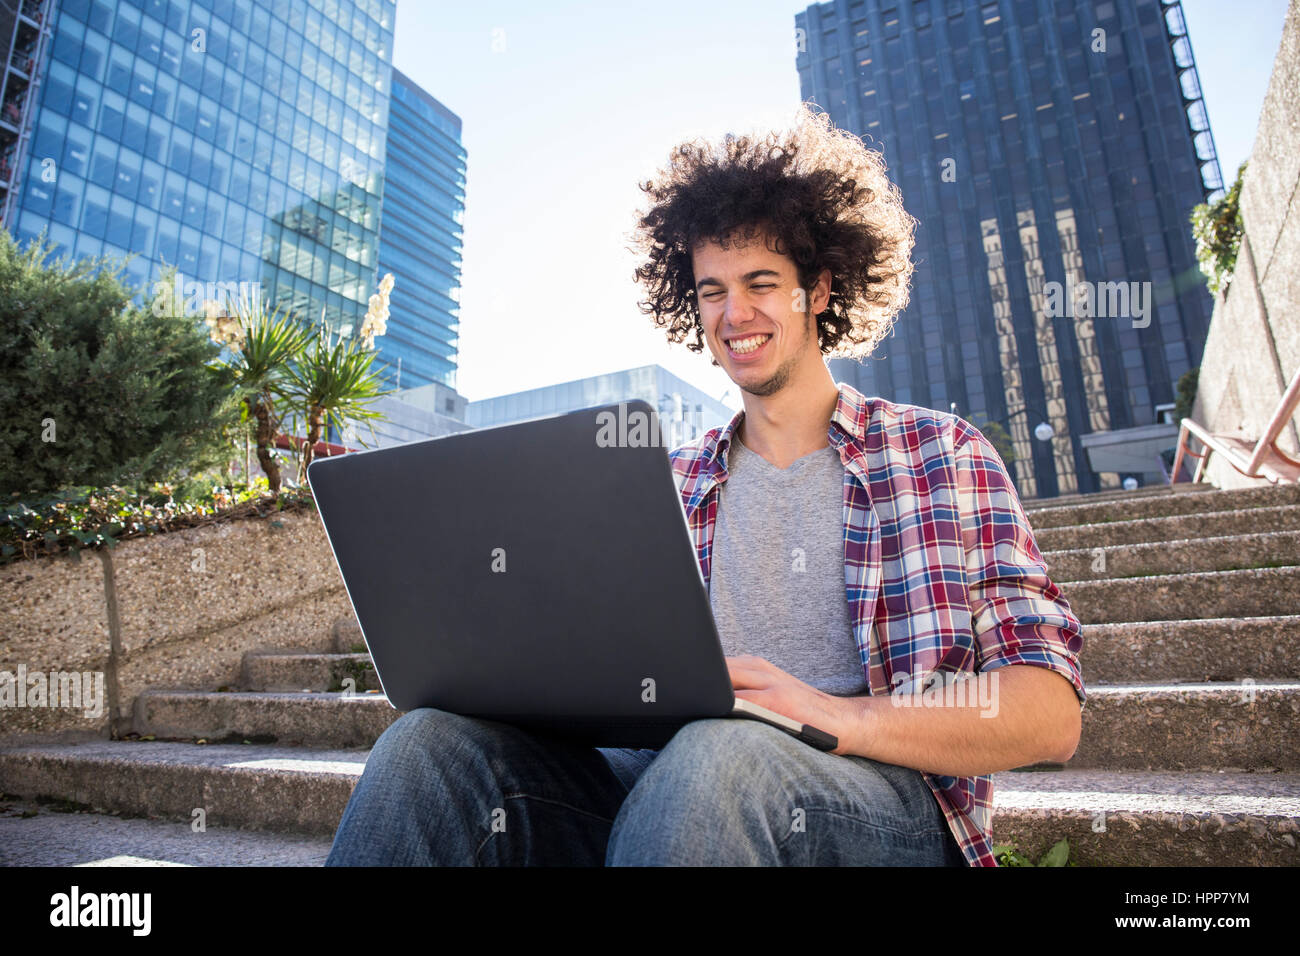 Portrait of young man sitting on stairs using laptop Stock Photo